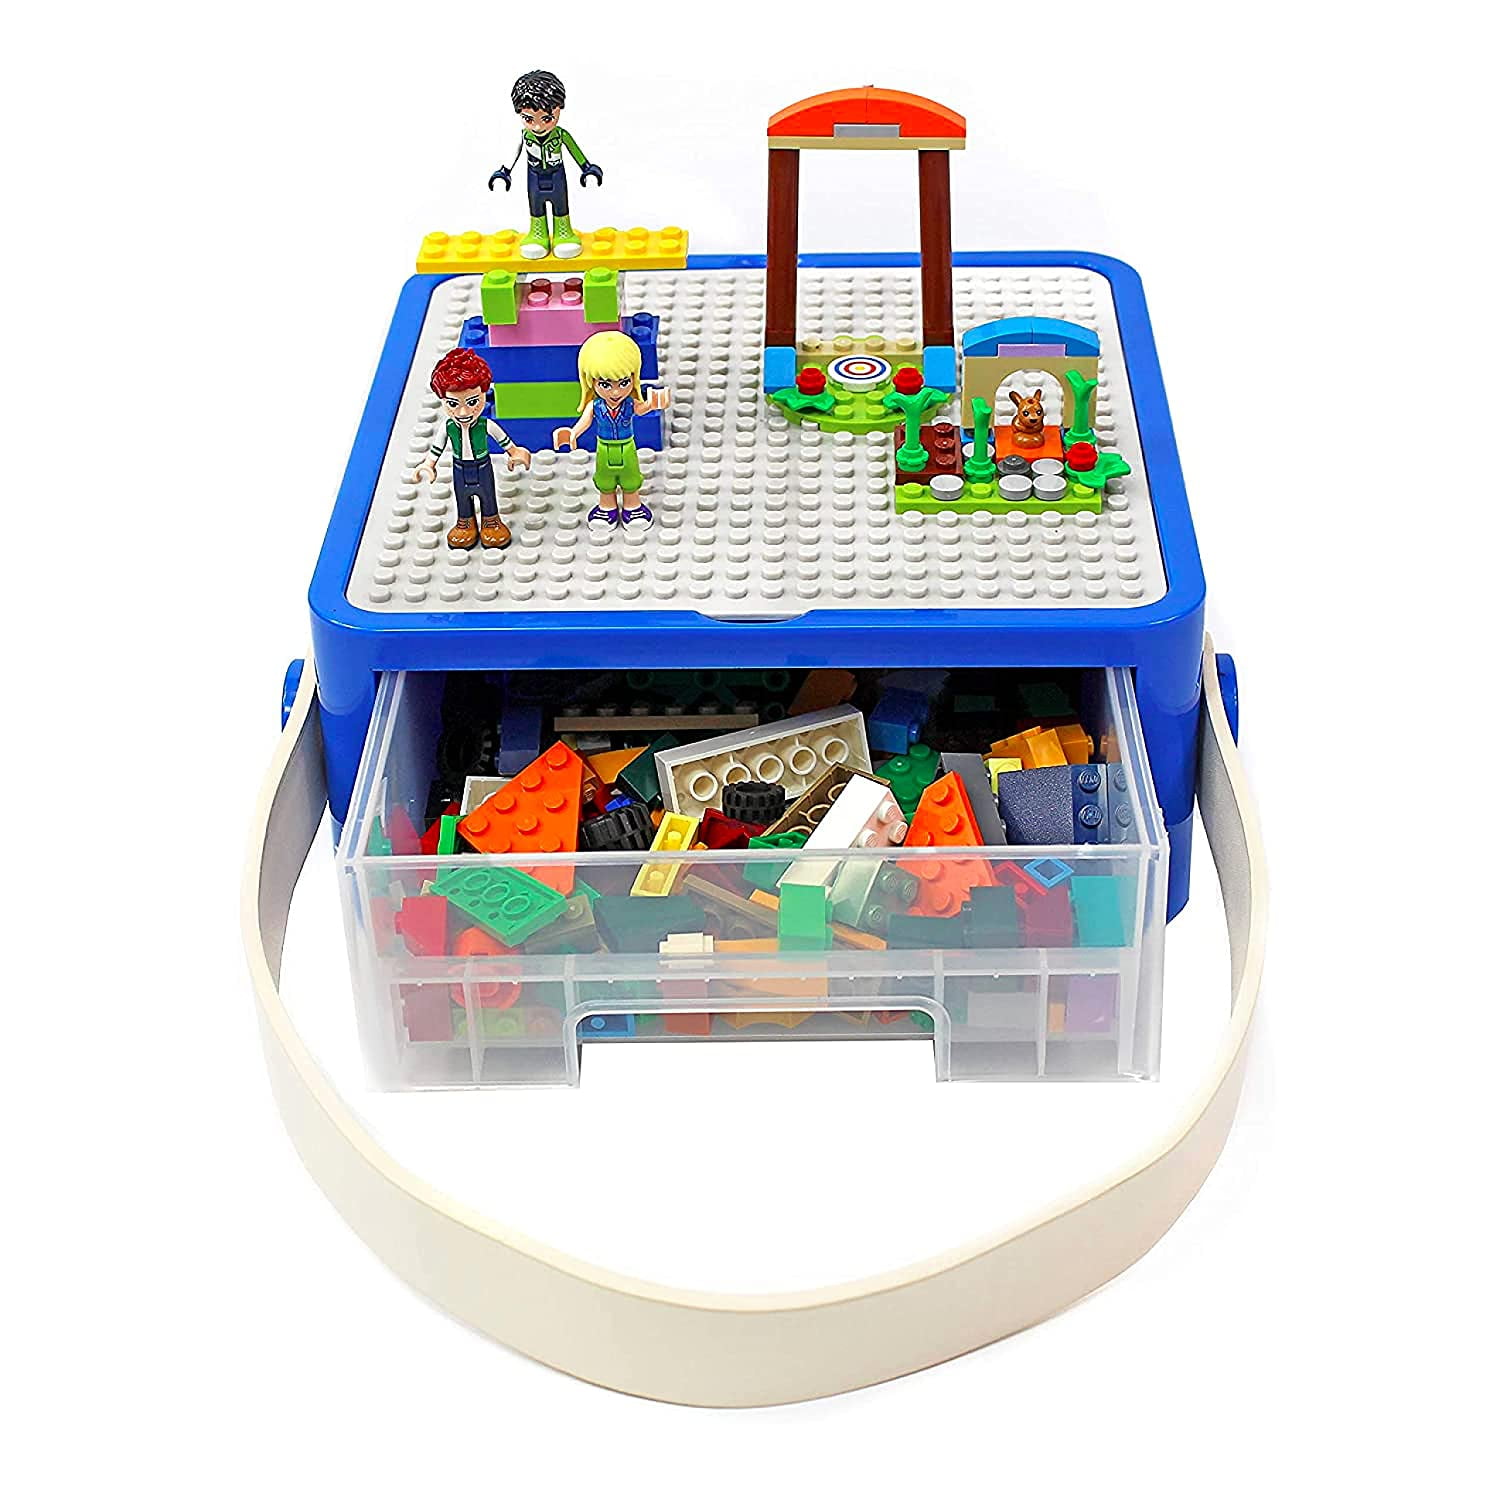 Bins & Things Lego-Compatible Storage Container With Lego